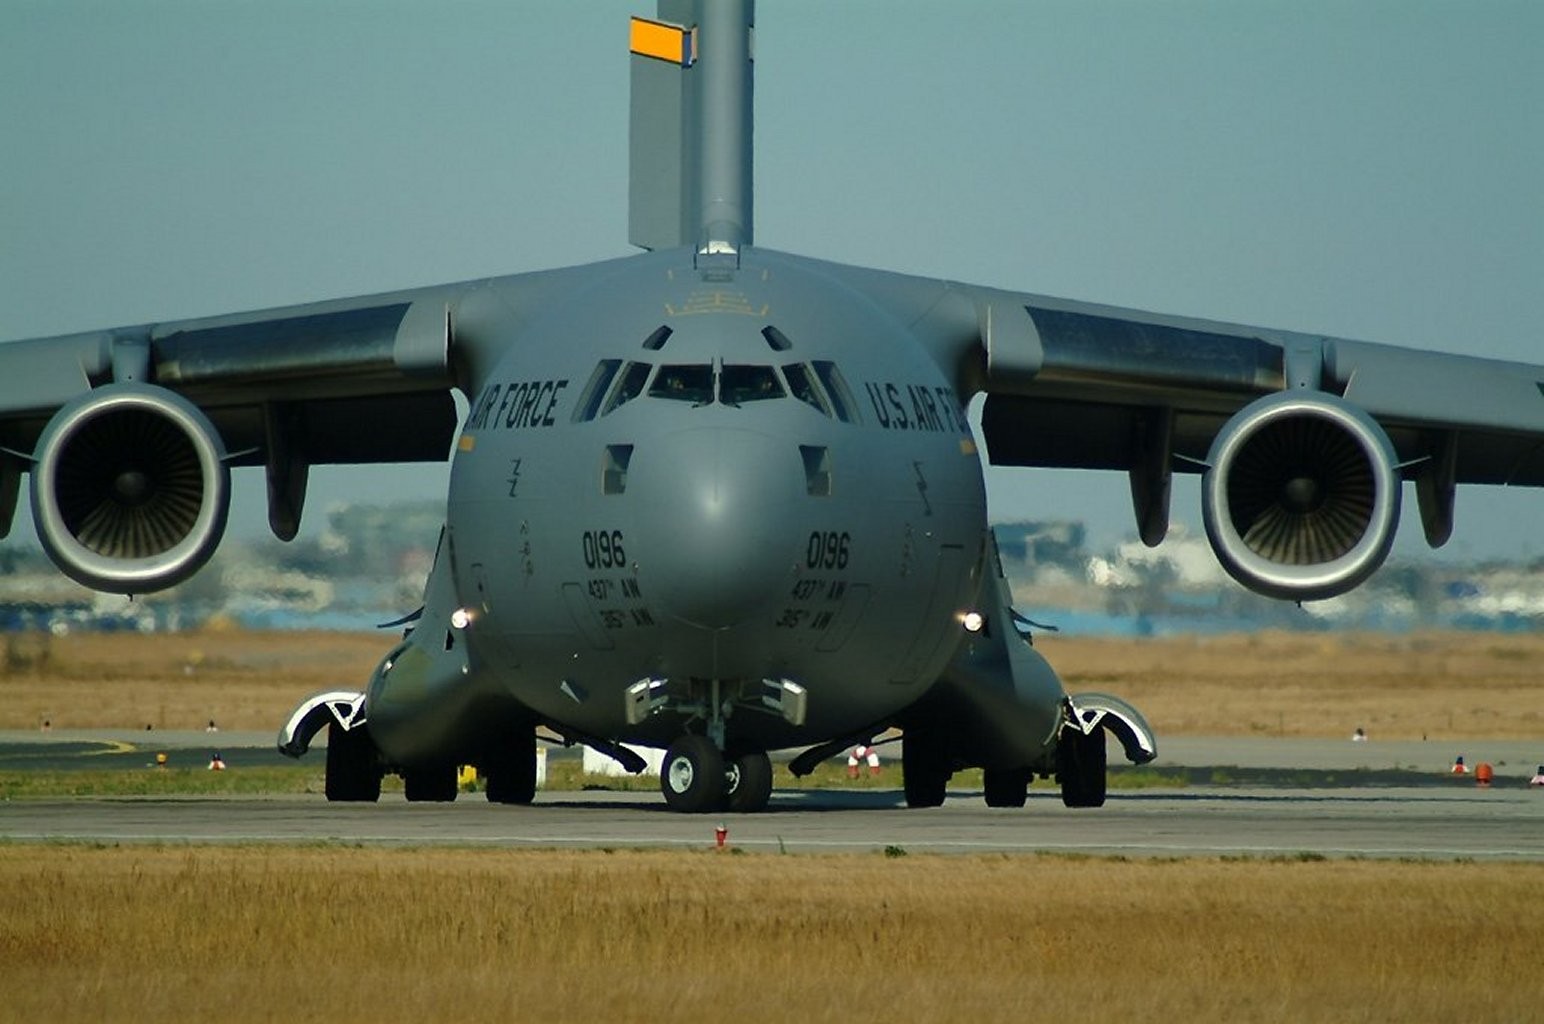 Airplane US Air Force Army C 17 Globmaster Military Aircraft Vehicle Military Aircraft 1544x1024